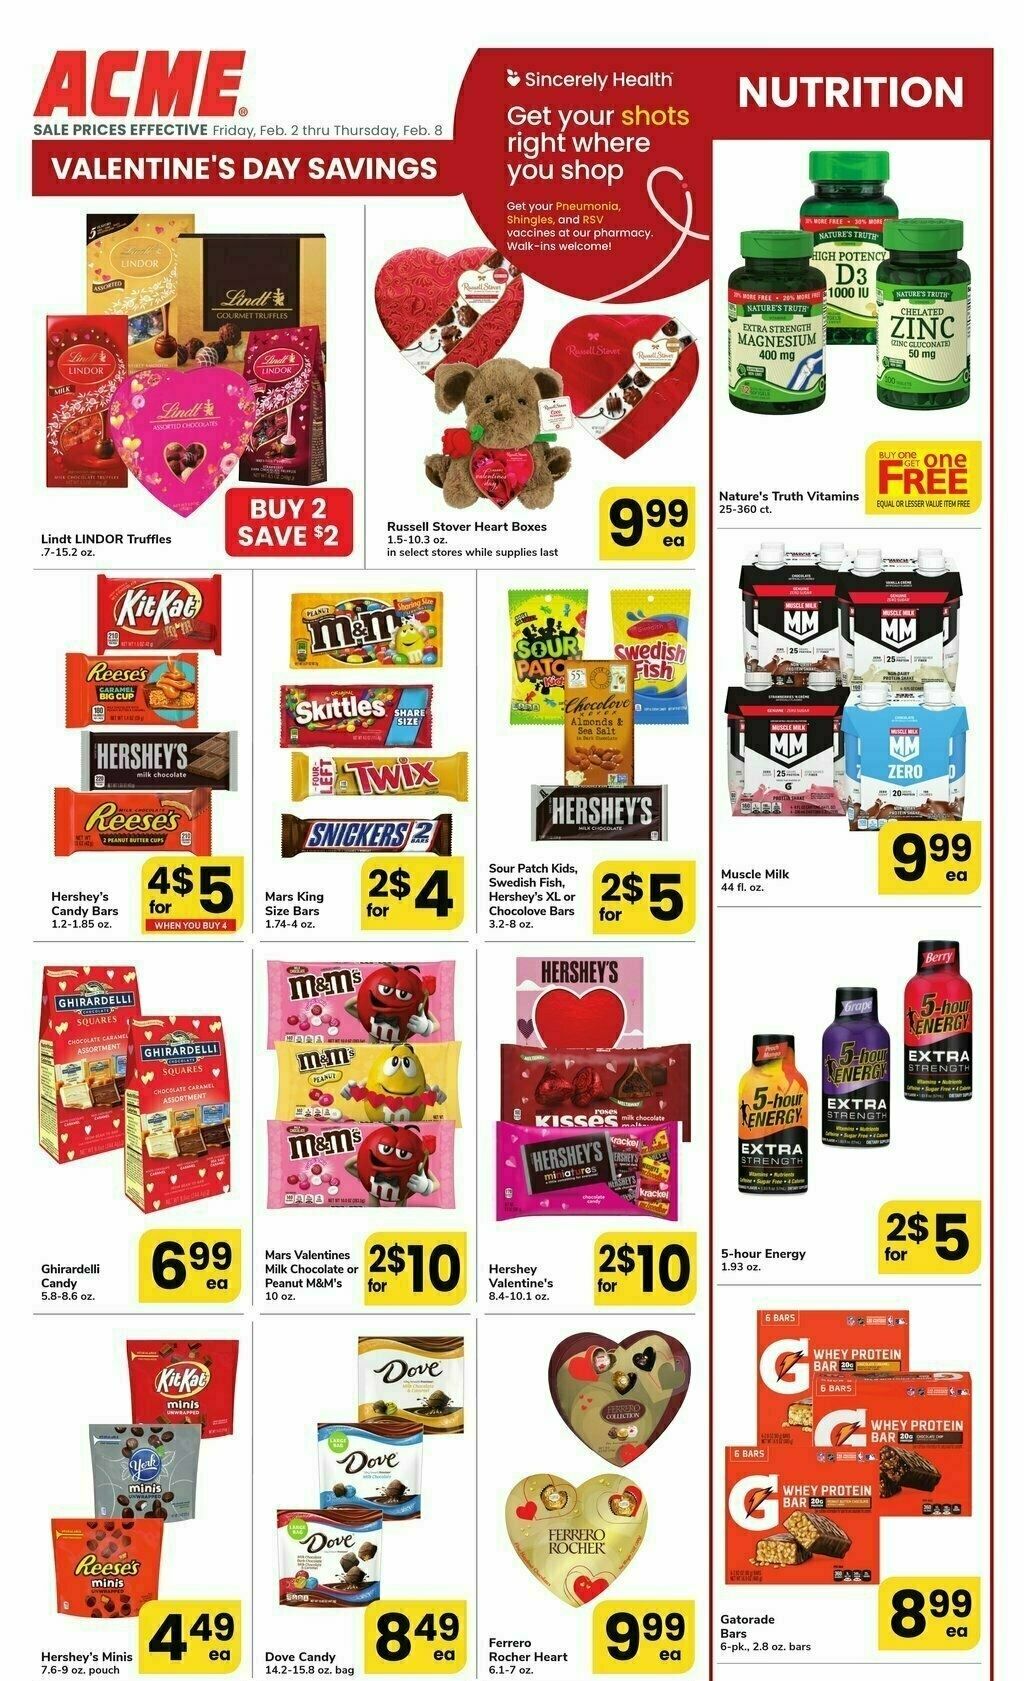 ACME Markets Health, Home & Beauty Weekly Ad from February 2